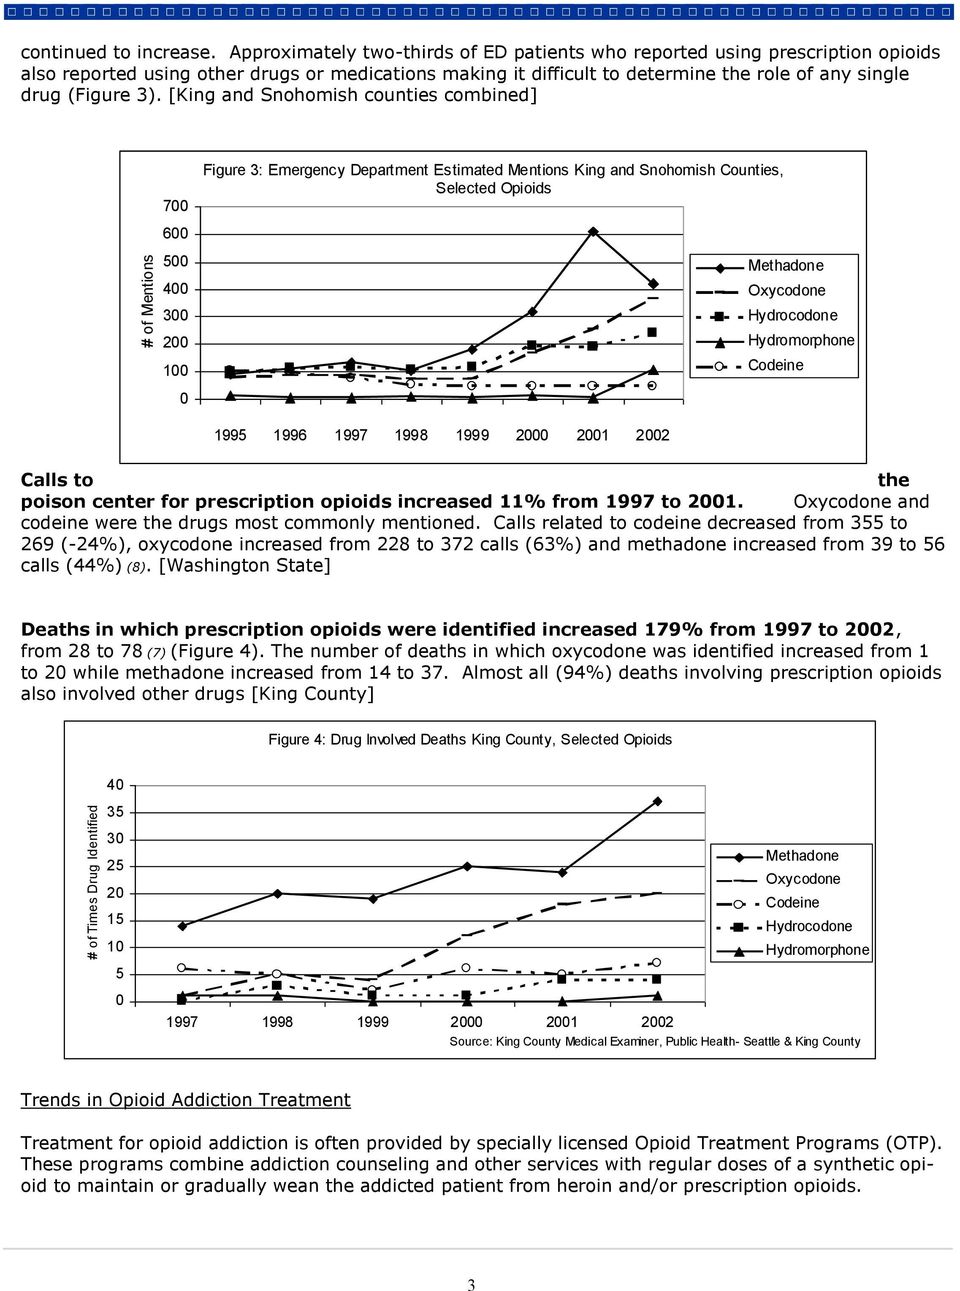 [King and Snohomish counties combined] 7 6 5 4 3 2 1 Figure 3: Emergency Department Estimated Mentions King and Snohomish Counties, Selected Opioids Hydrocodone Hydromorphone Codeine 1995 1996 1997